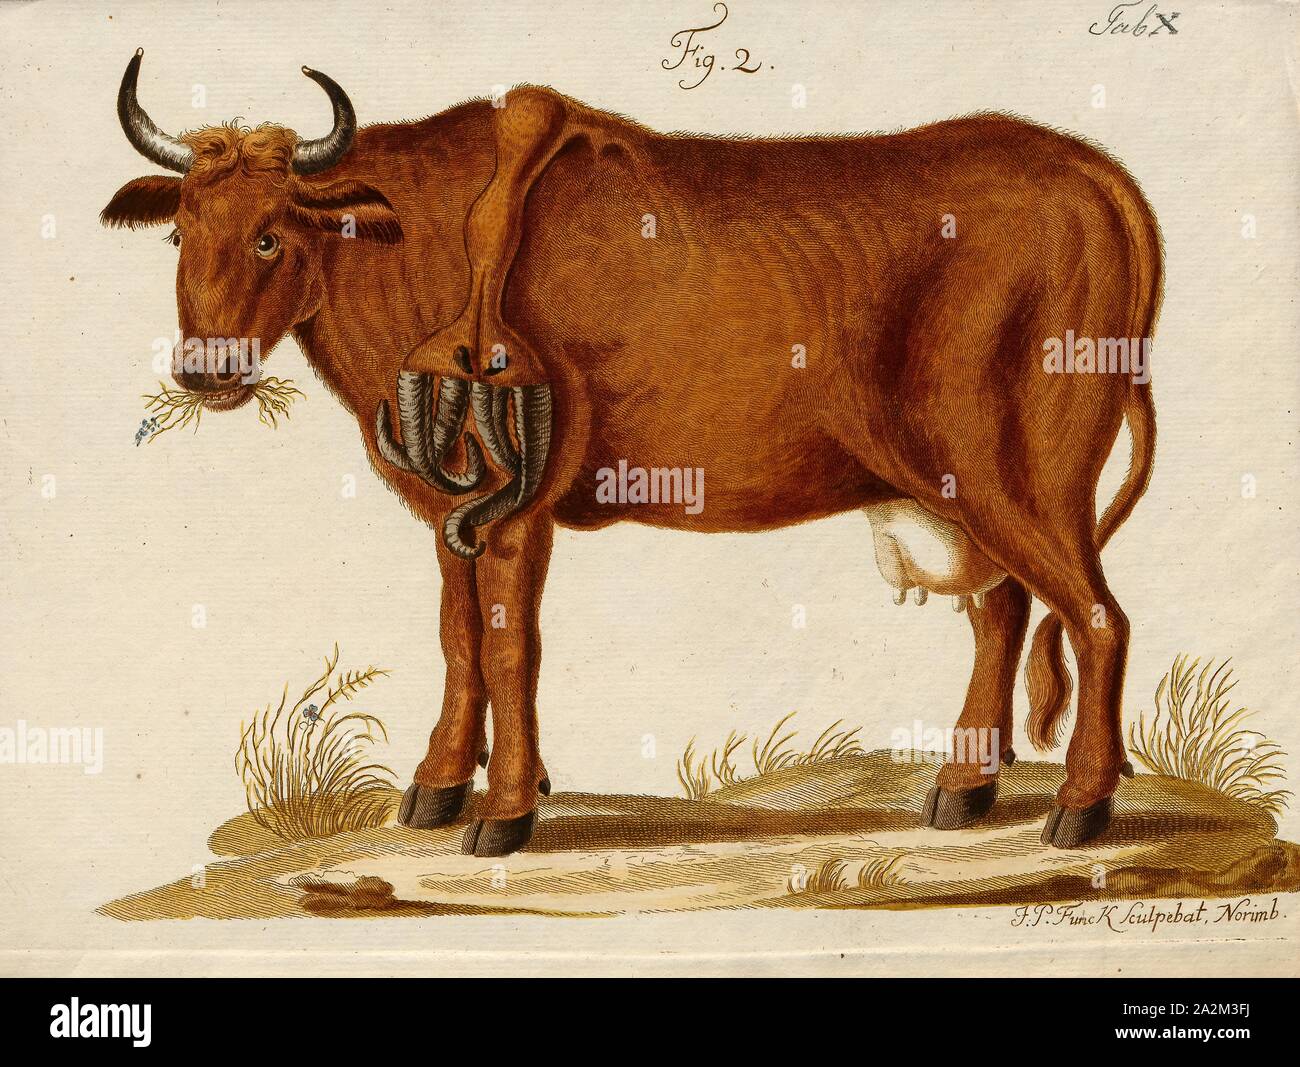 Bos domesticus, Print, Bos is the genus of wild and domestic cattle. Bos can be divided into four subgenera: Bos, Bibos, Novibos, and Poephagus, but these divisions are controversial. The genus has five extant species. However, this may rise to seven if the domesticated varieties are counted as separate species, and nine if the closely related genus Bison is also included. Most modern breeds of domesticated cattle are believed to have originated from the extinct aurochs., with abnormality Stock Photo